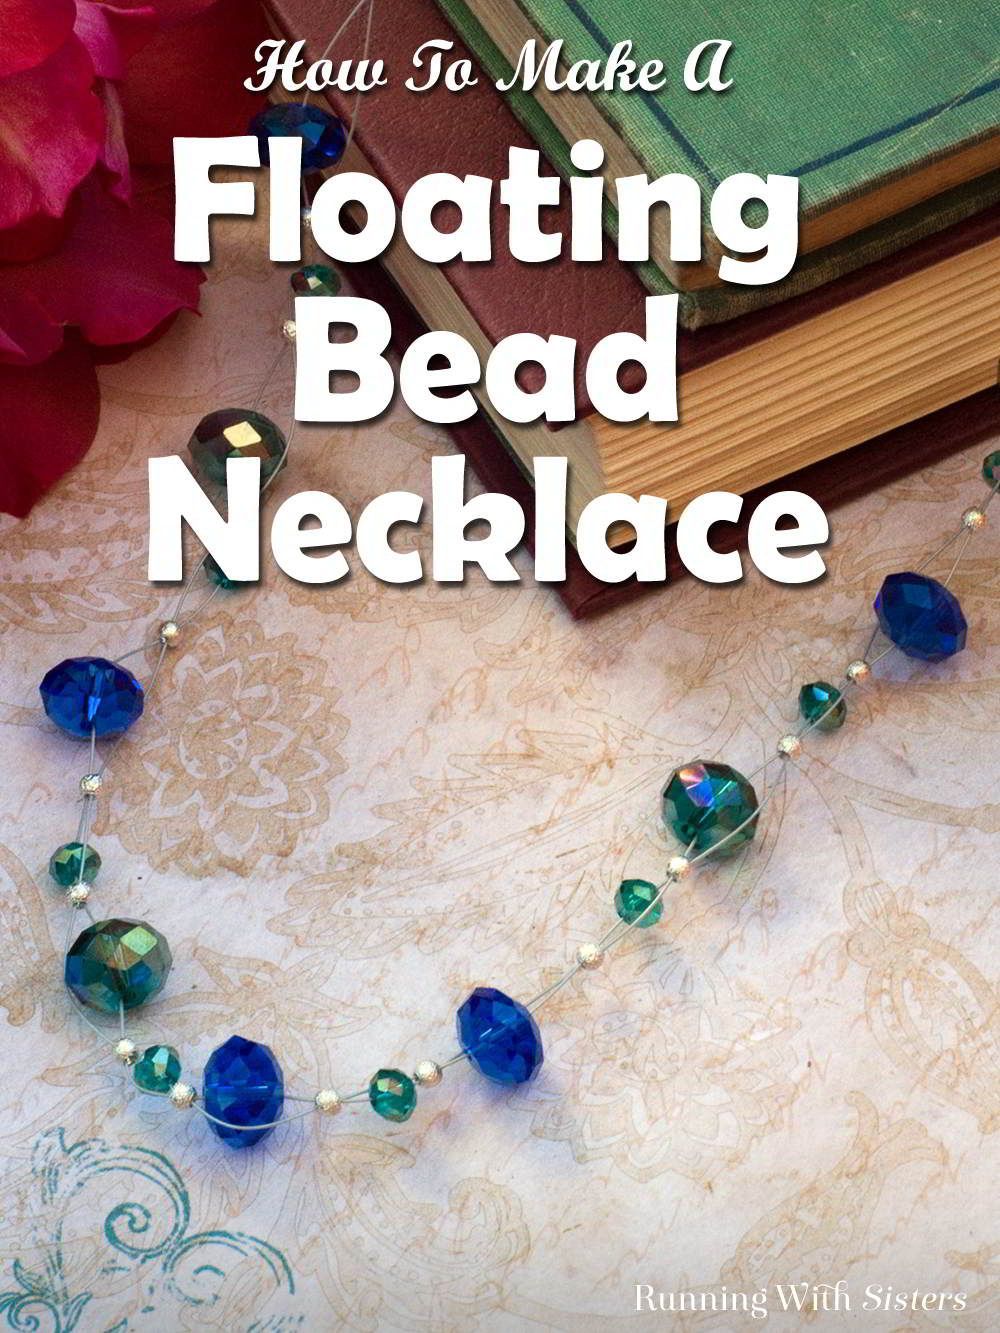 How To Make A Floating Bead Necklace -   24 diy necklace beads
 ideas